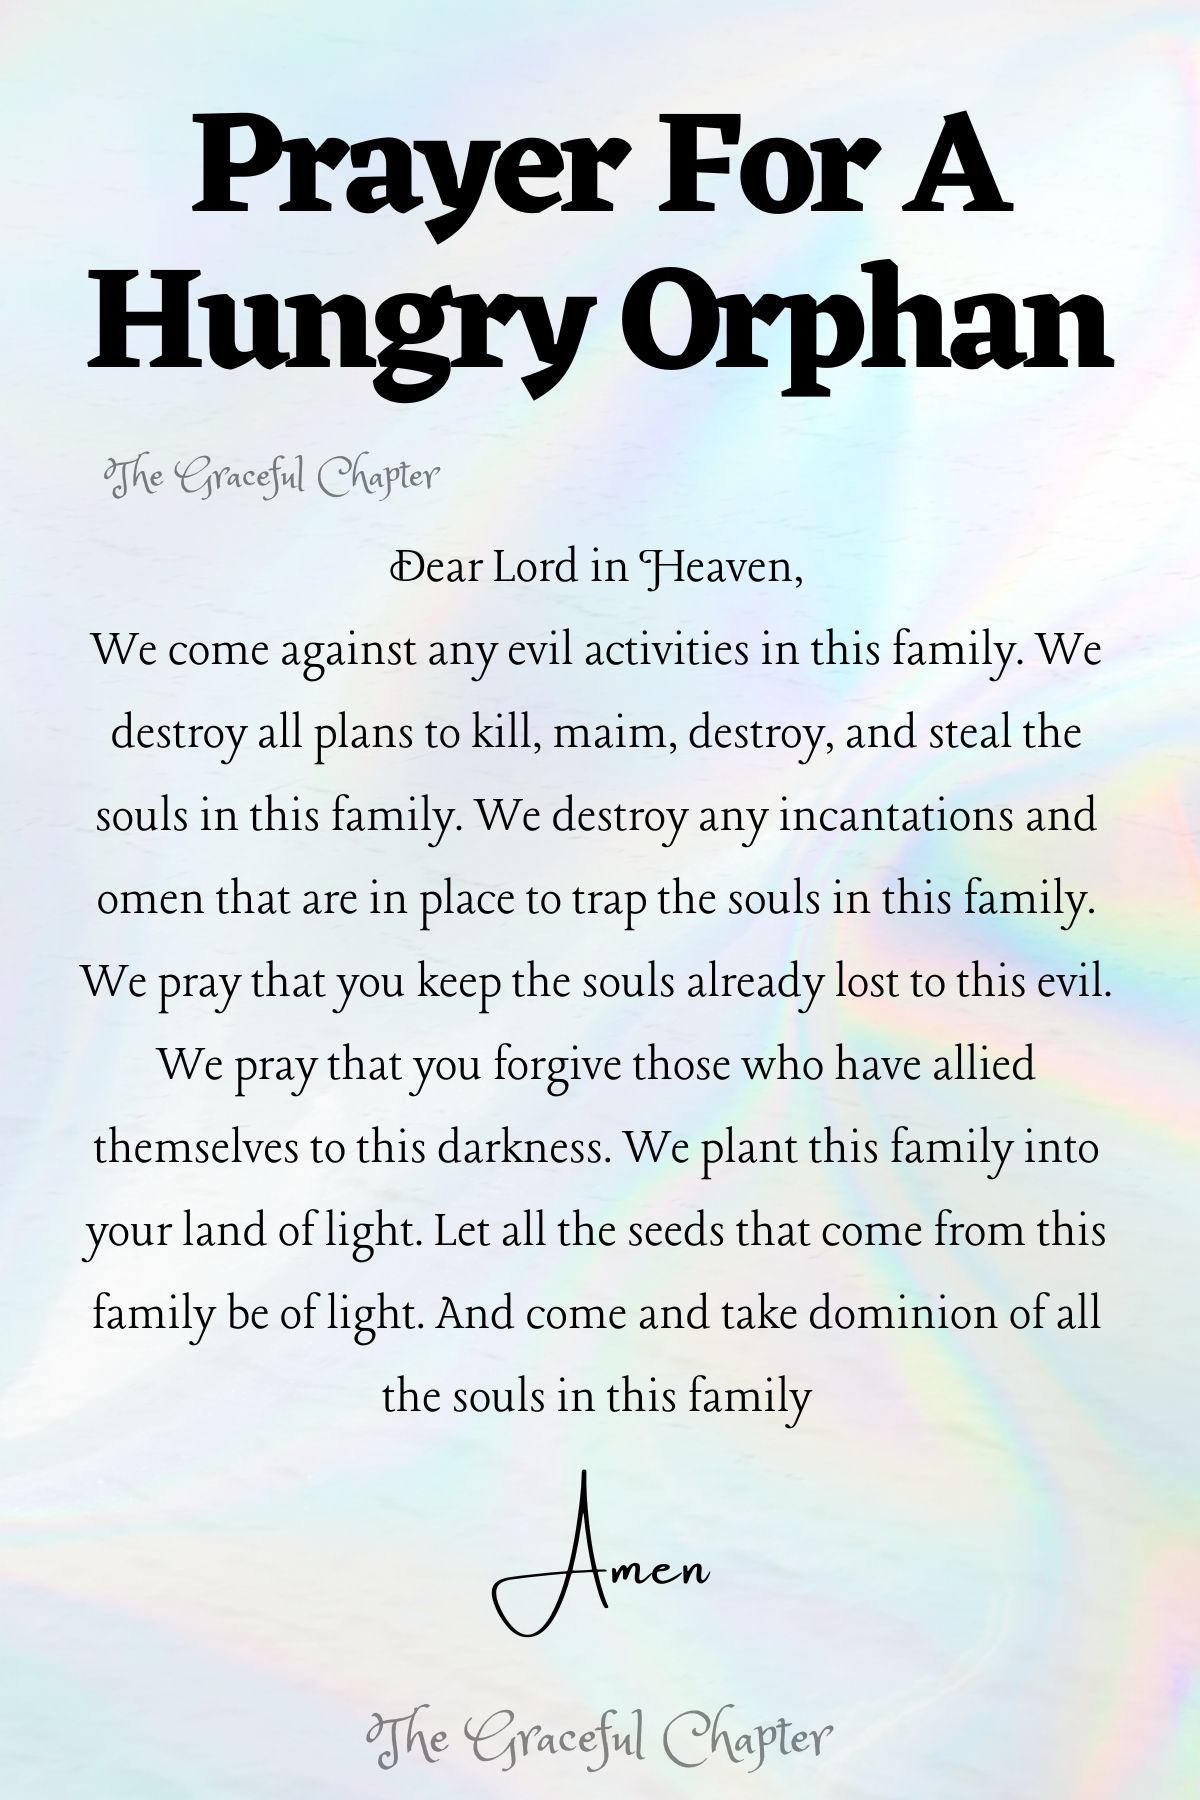 Prayer for a hungry orphan